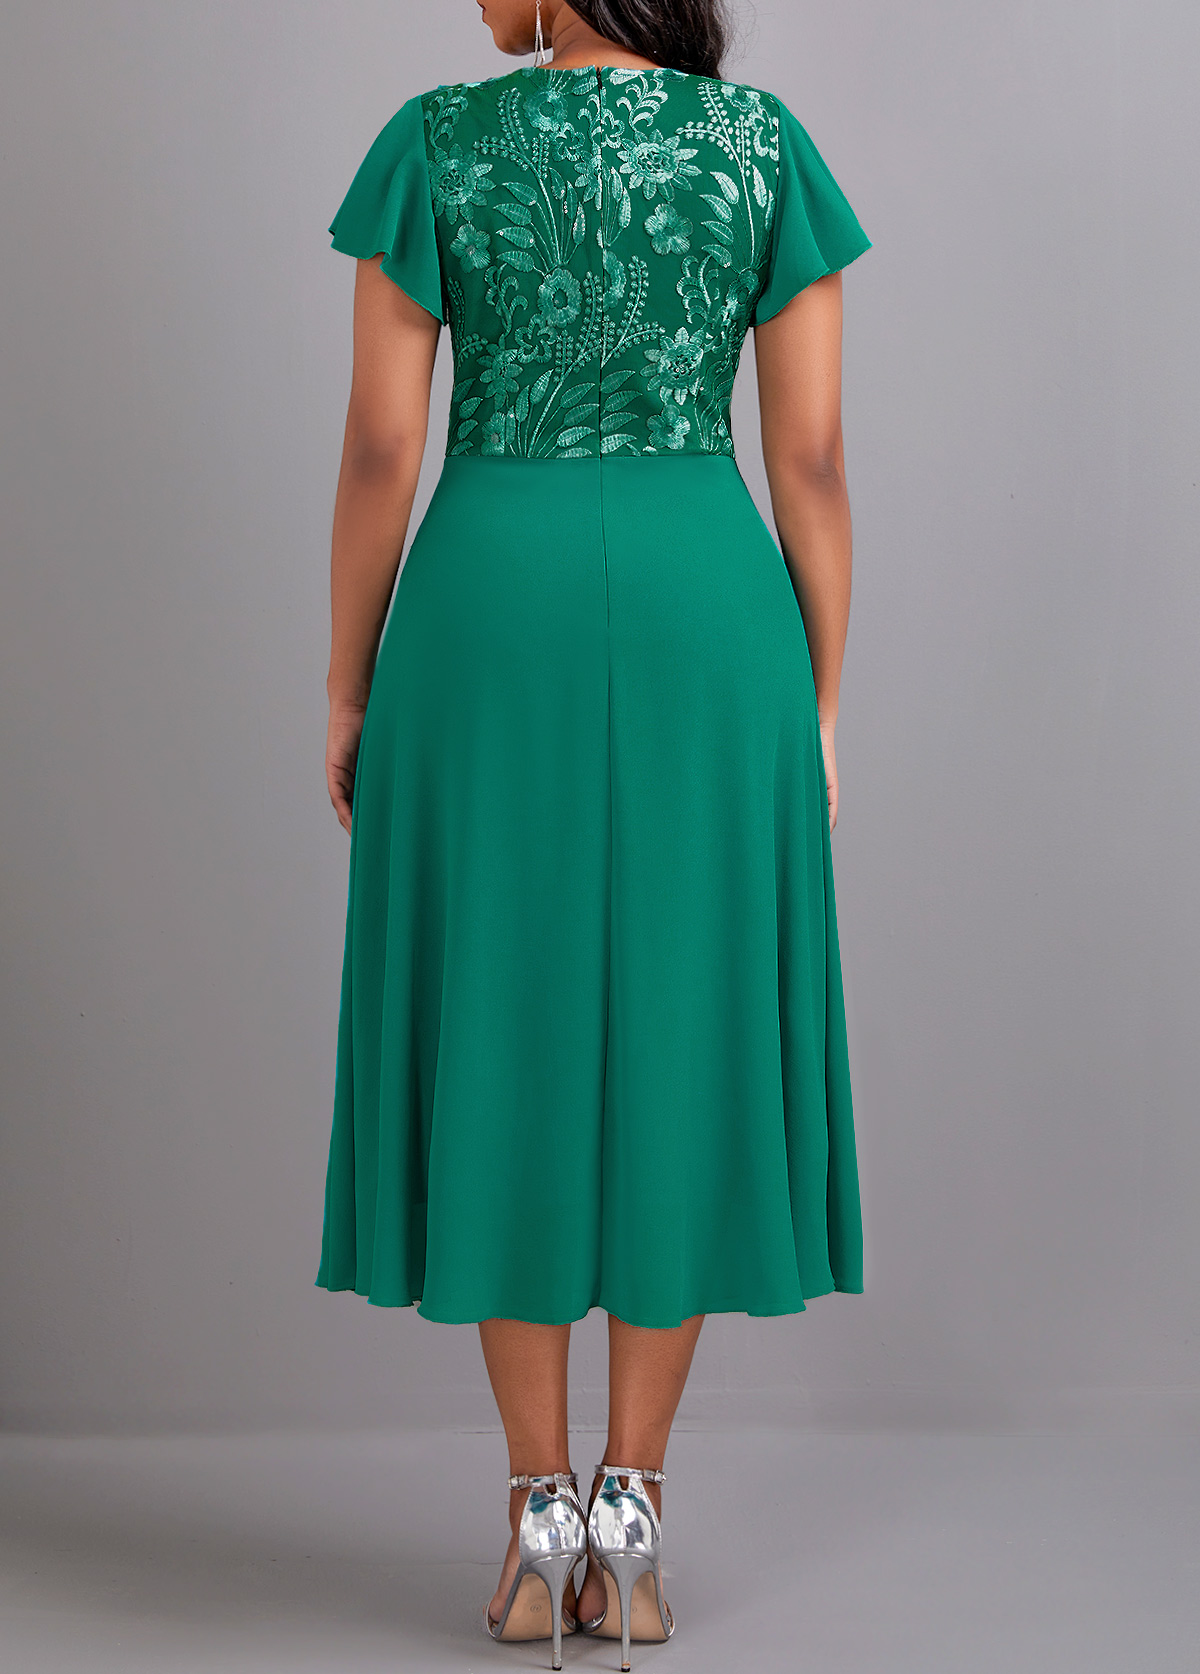 Lace Frill Green Round Neck Short Sleeve Dress